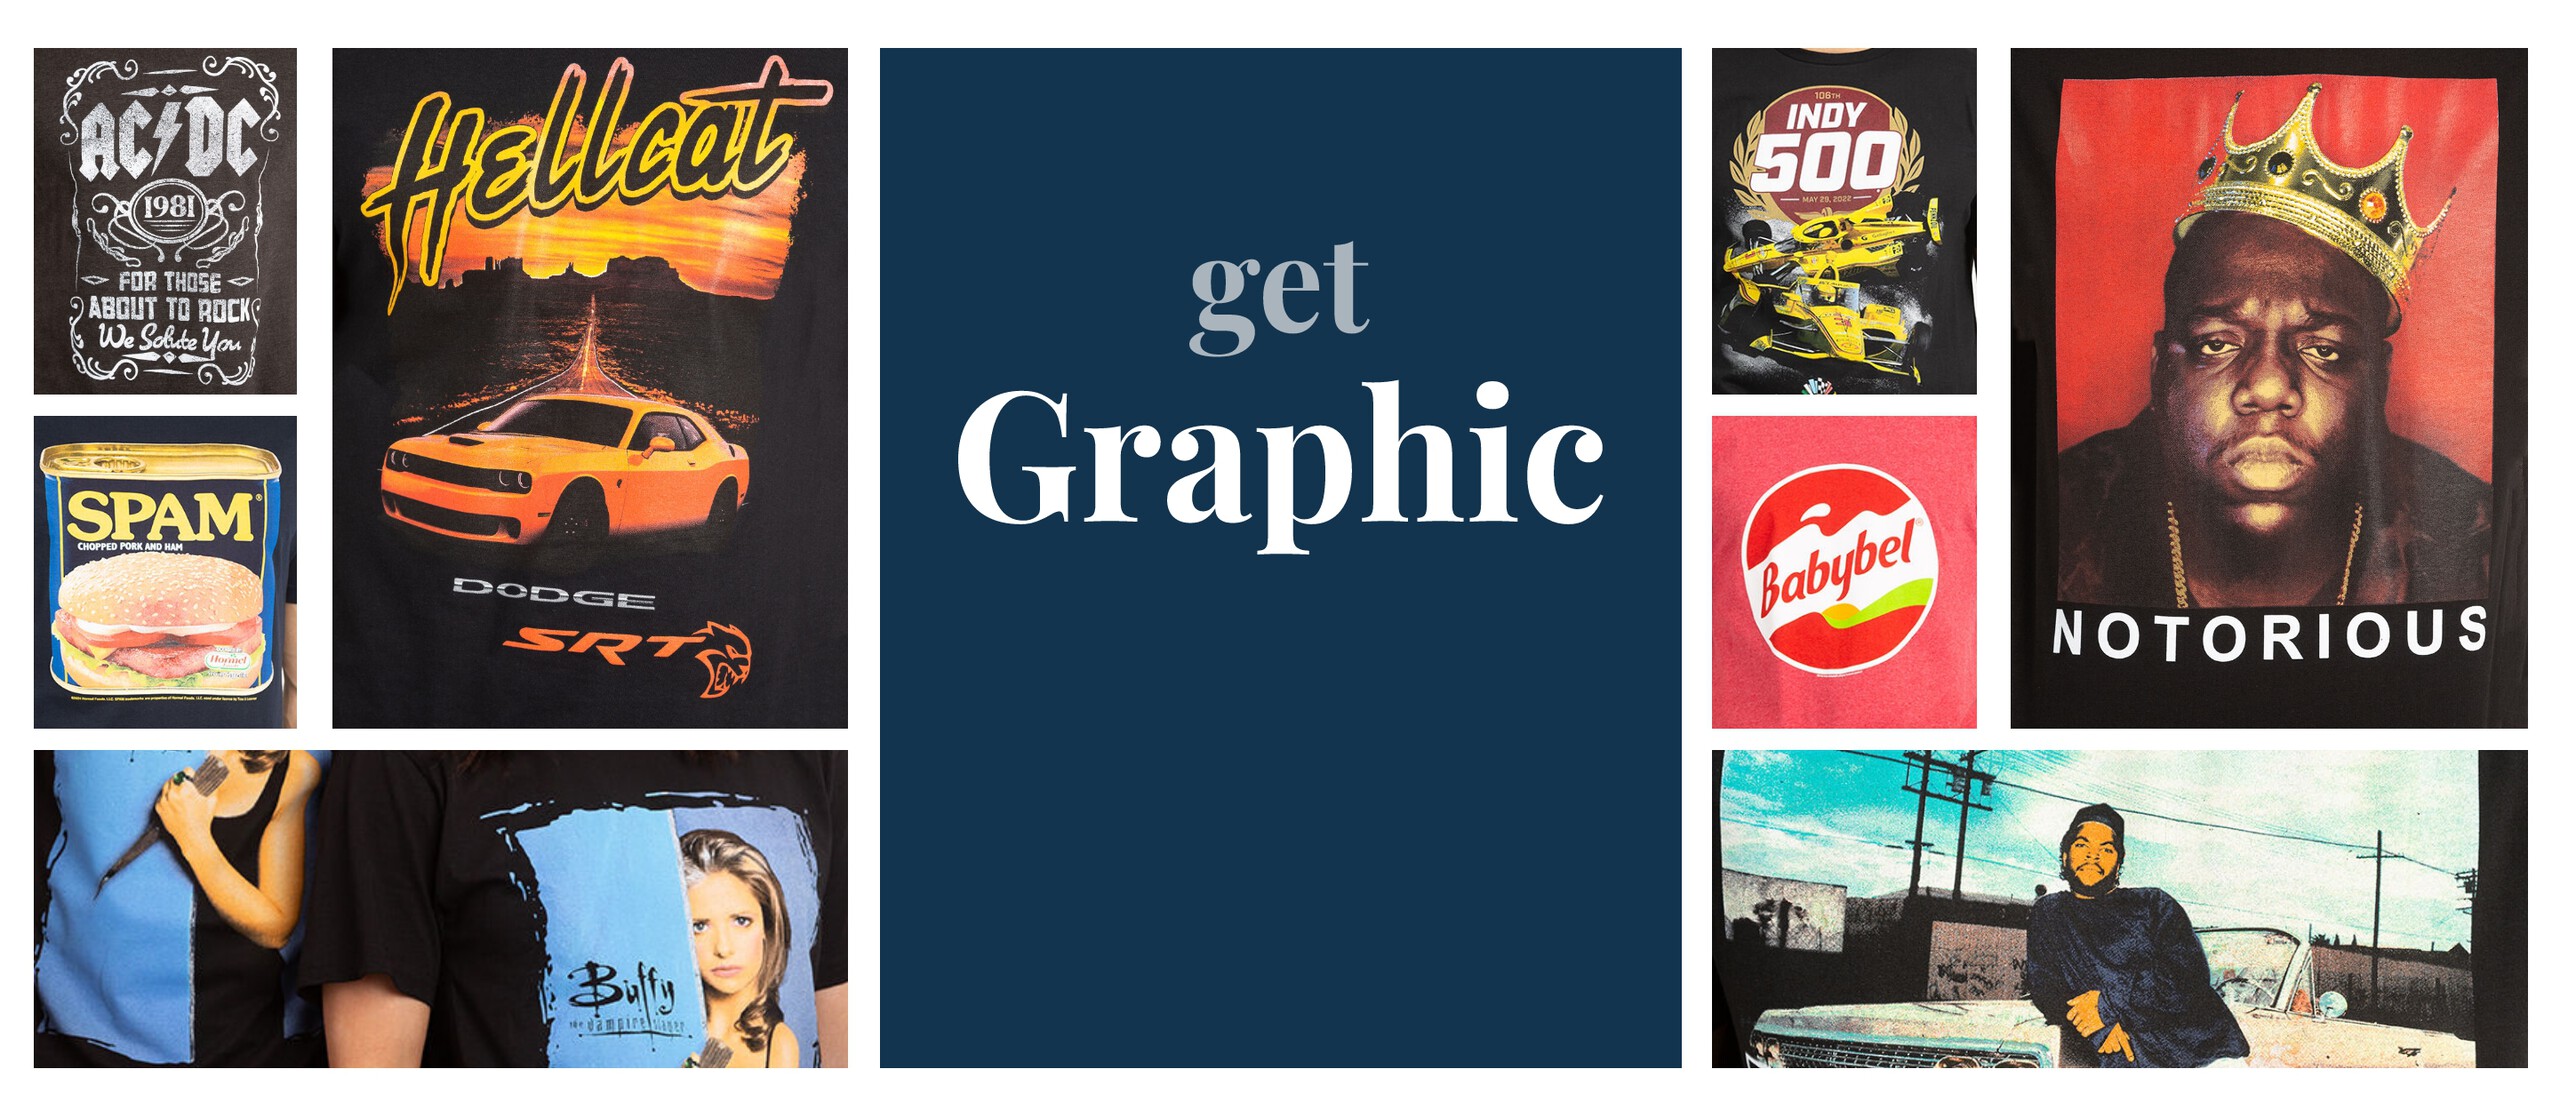 Get Graphic - Shop Graphic Tees